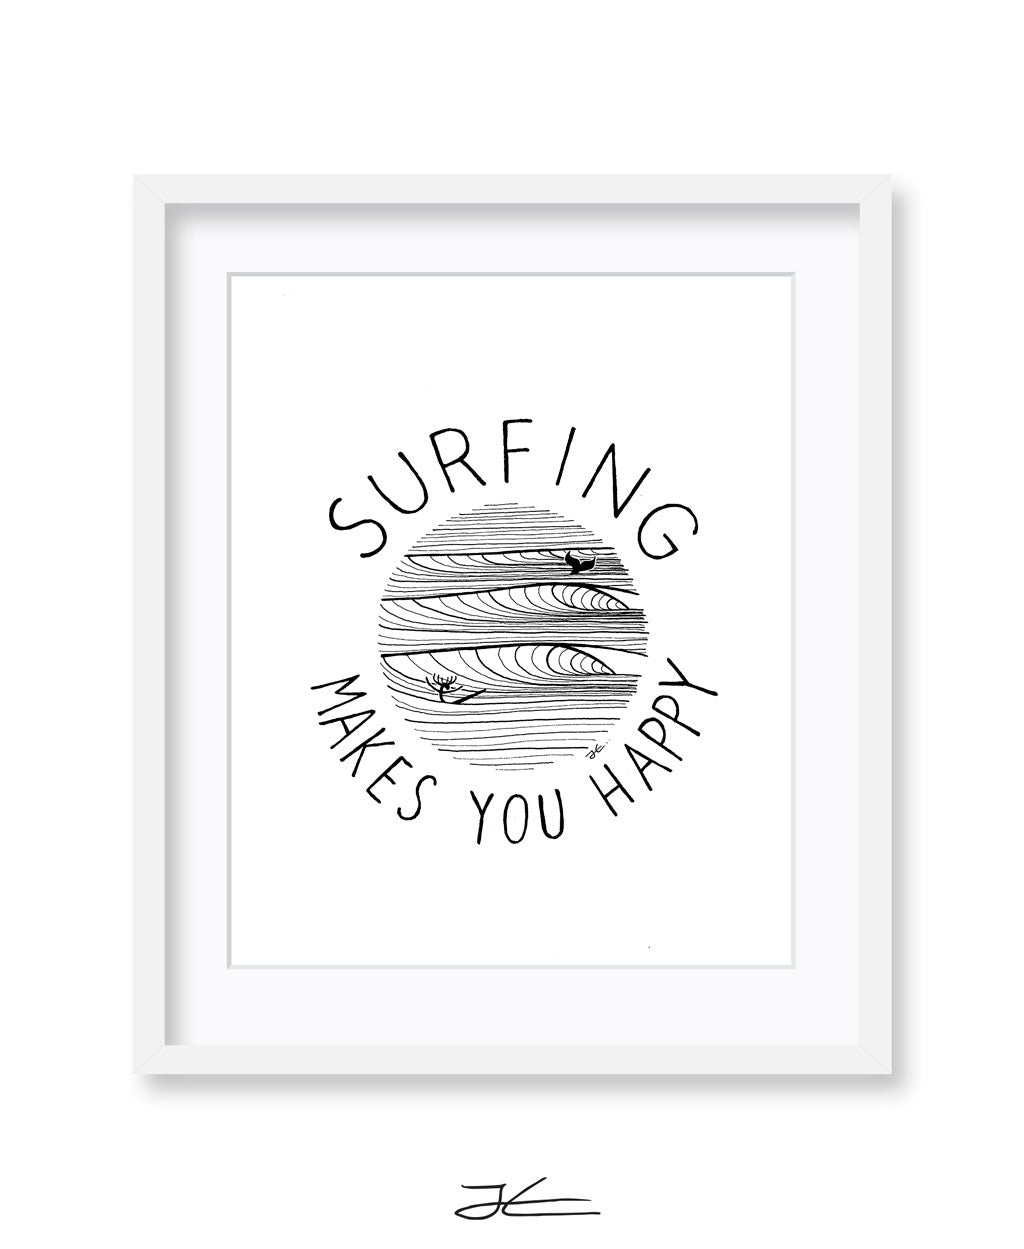 Surfing Makes You Happy - Print/ Framed Print